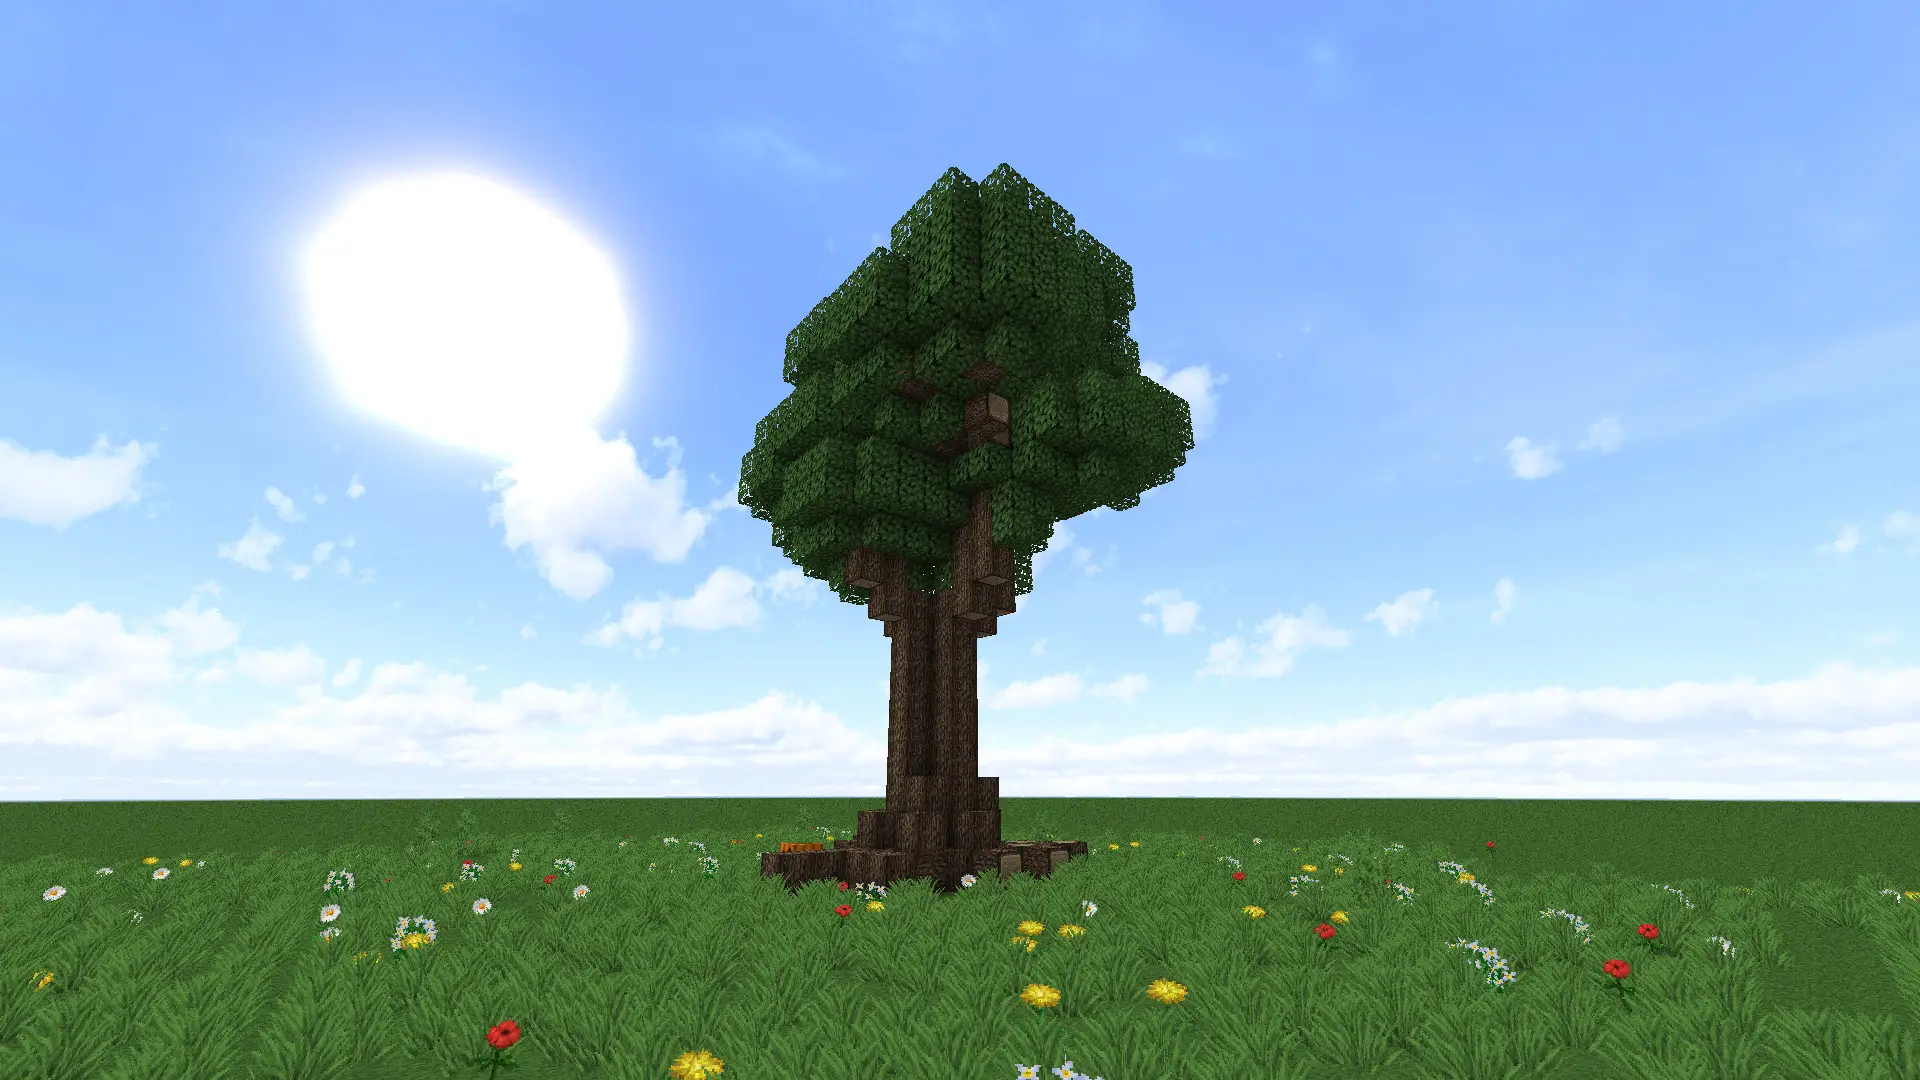 Decorate Your World With This Minecraft Tree Build - BC-GB